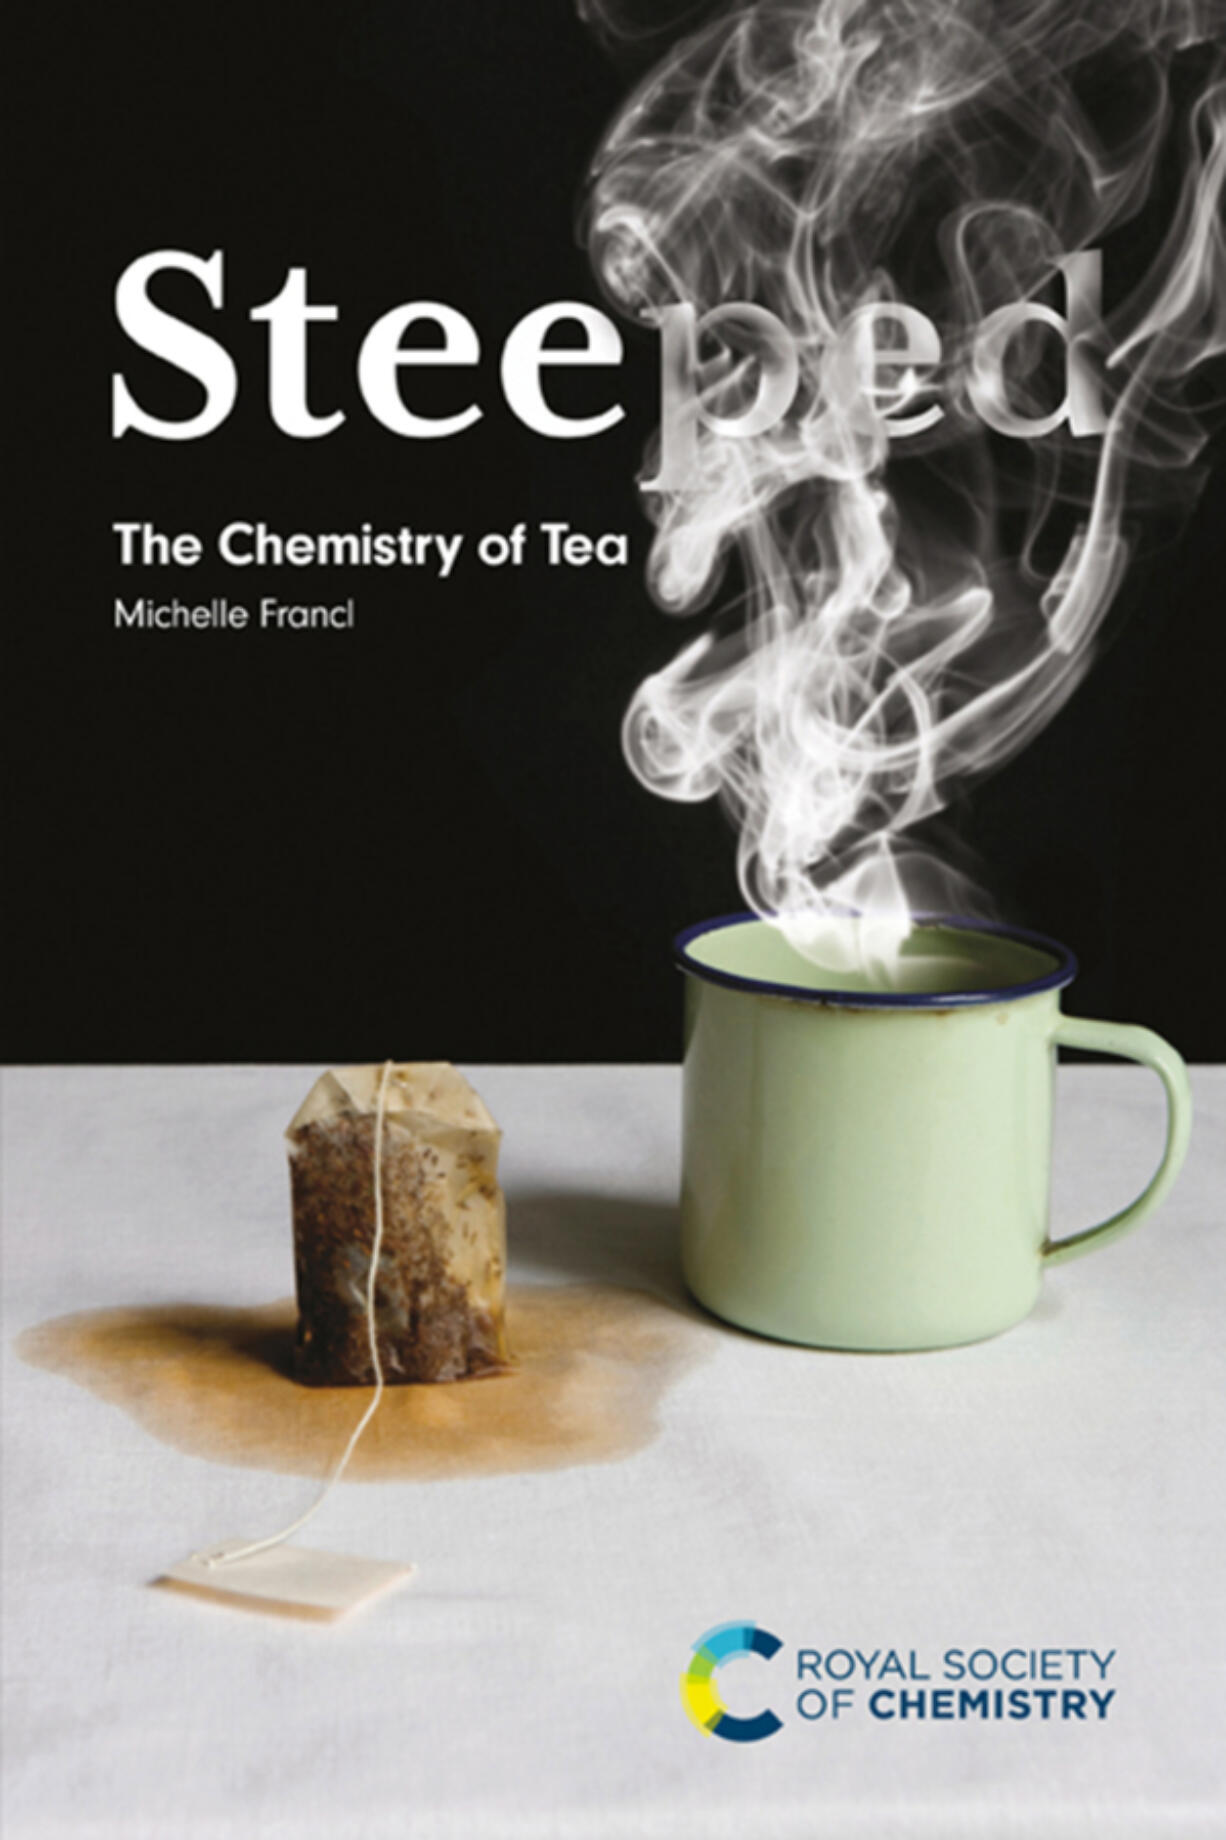 &ldquo;Steeped: The Chemistry of Tea&rdquo; by Michelle Francl.